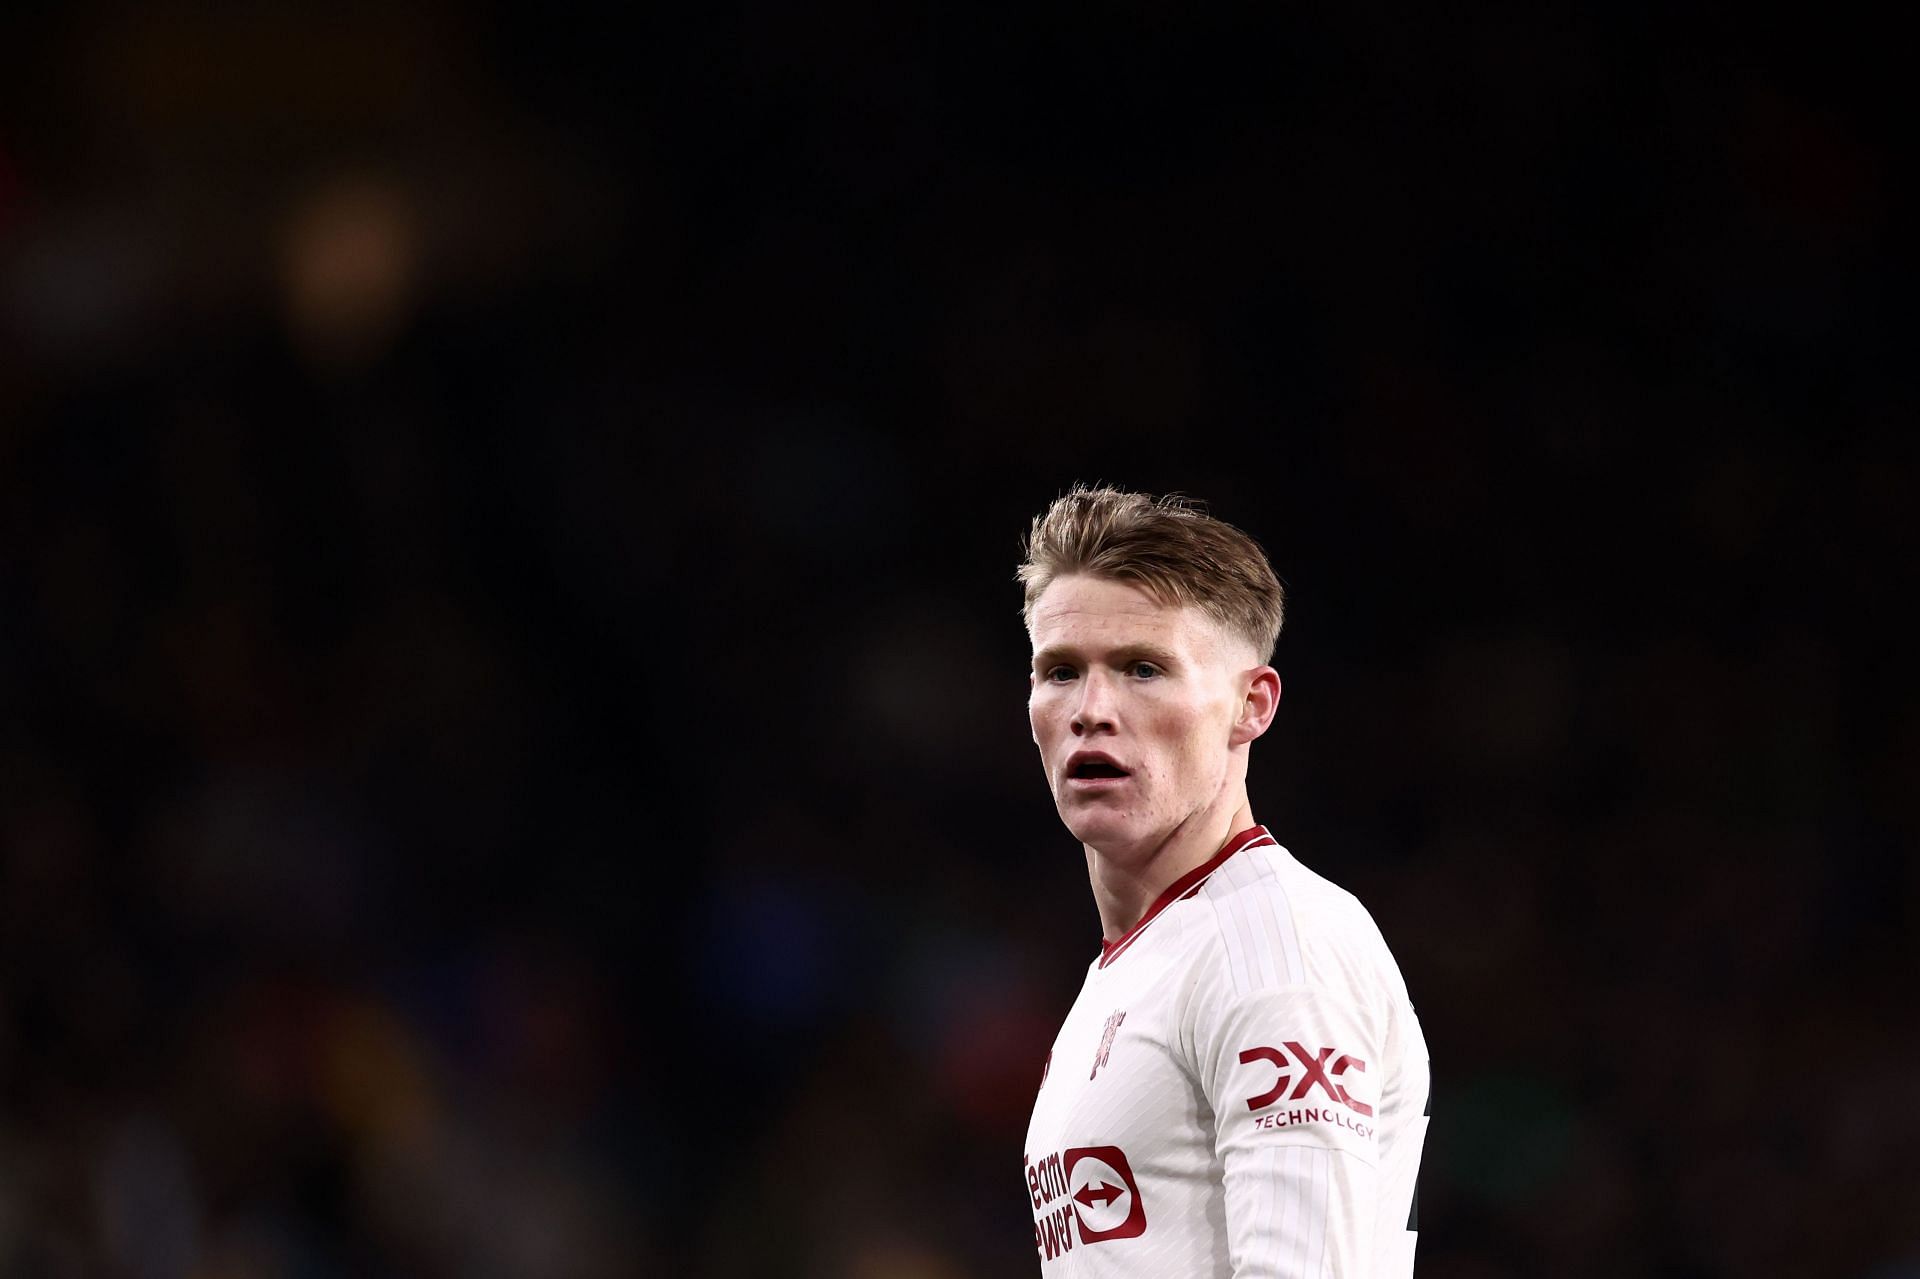 Scott McTominay has been on good form this season